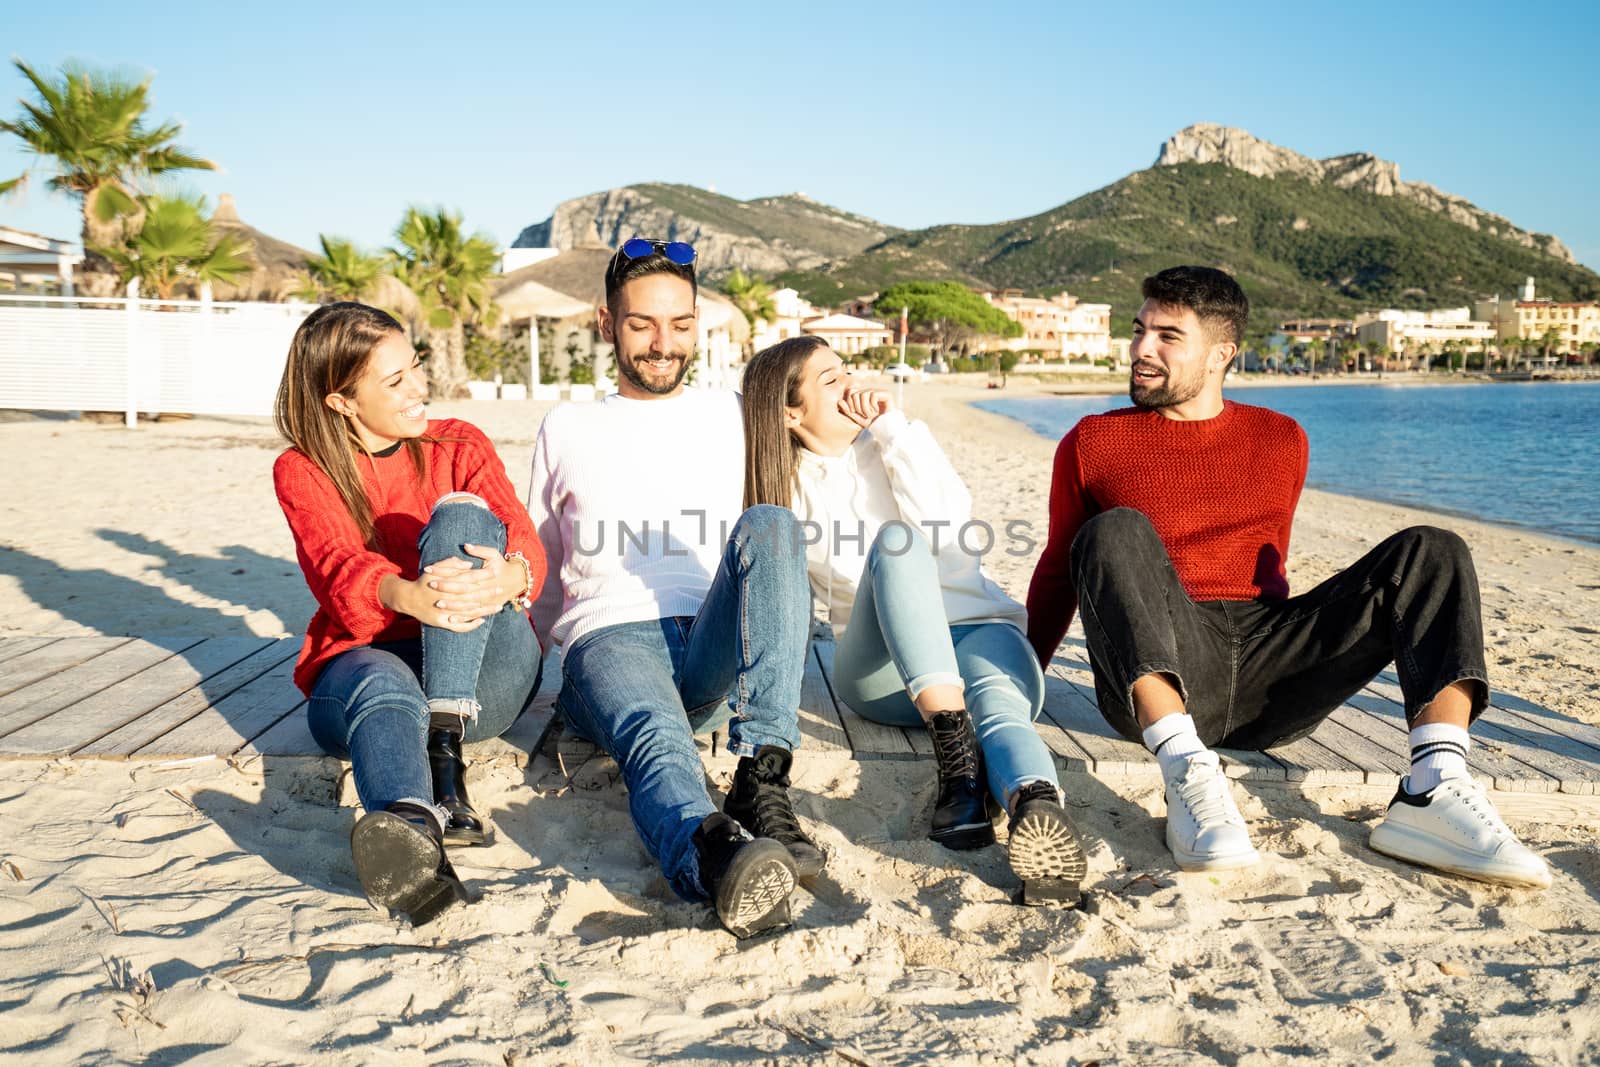 Two young couples by the sea at sunset in a seaside resort in winter having fun talking and laughing each other - Group of friends sitting on the beach in winter sea vacation - White and red clothing by robbyfontanesi